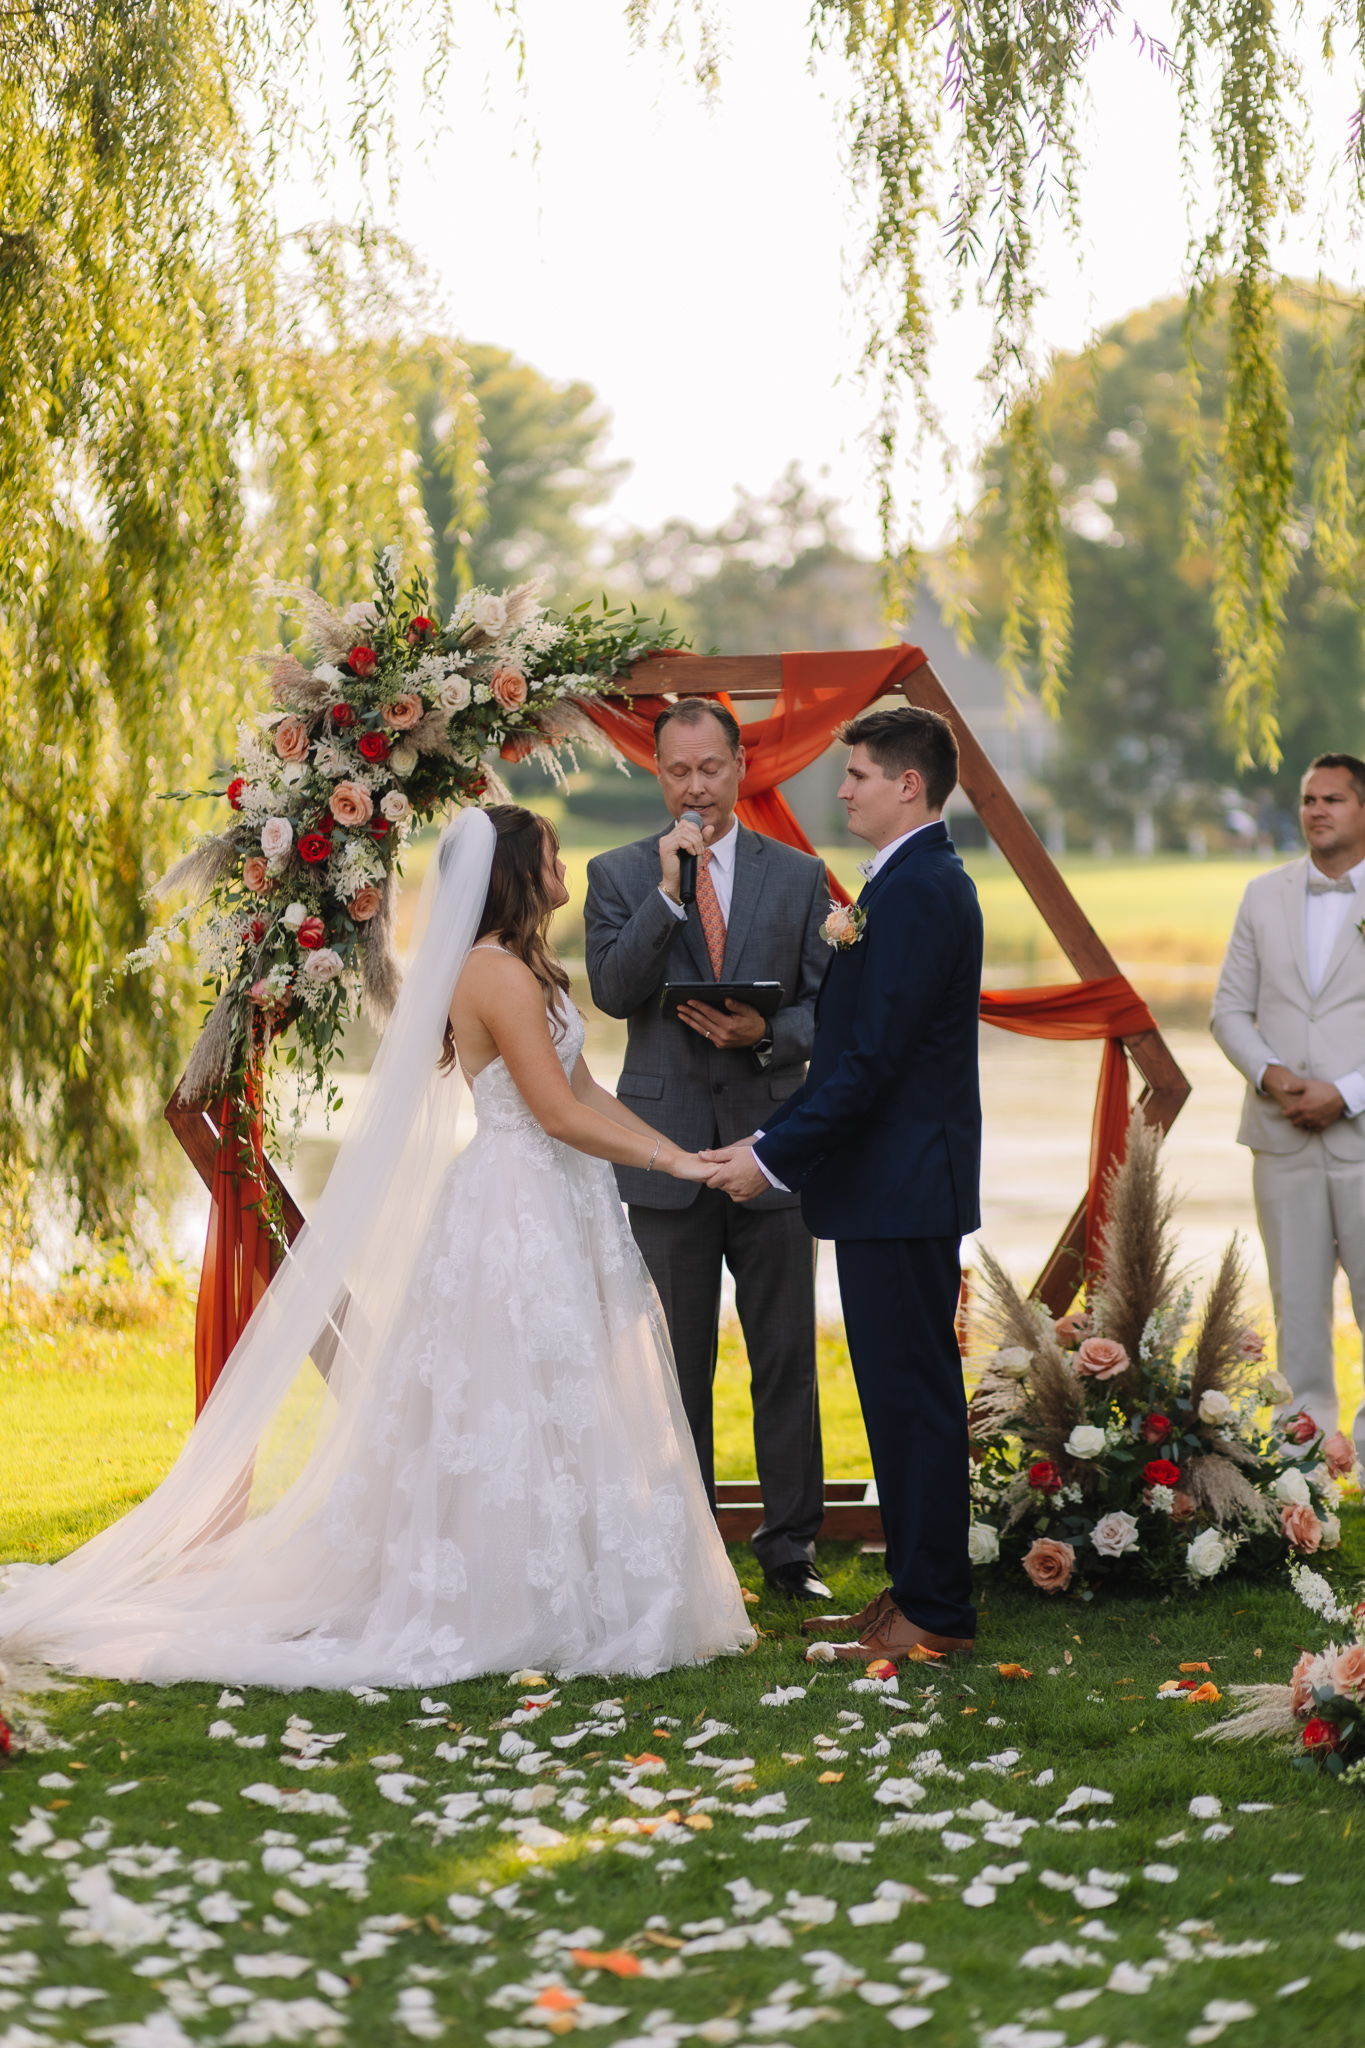 A bride and groom standing together in front of the alter holding hands. They are surrounded by willow trees and lush green grass. Flower petals are scattered down the alter of their outdoor wedding ceremony in Stillwater